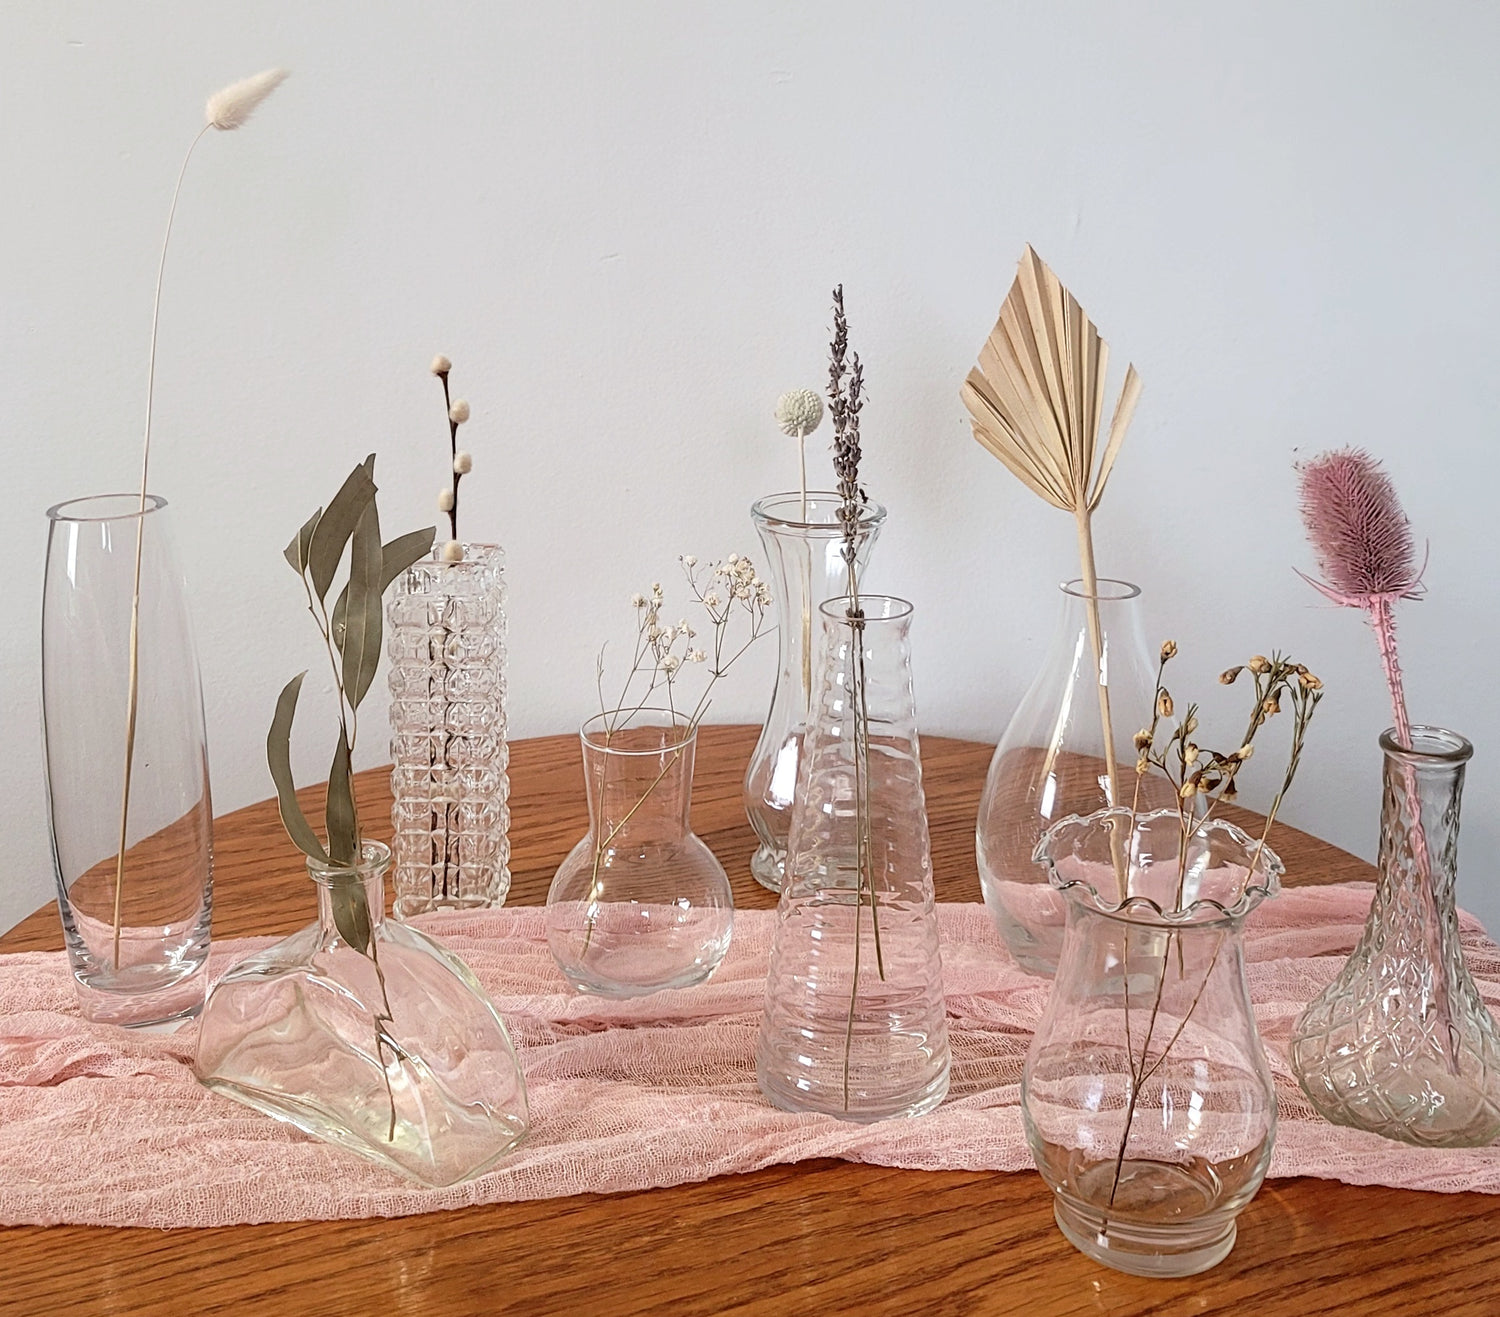 A collection of vintage mismatched clear glass bud vases, to make every table unique at your wedding or special event. Mismatched bud vase collection available for rent in Winnipeg and surrounding areas.